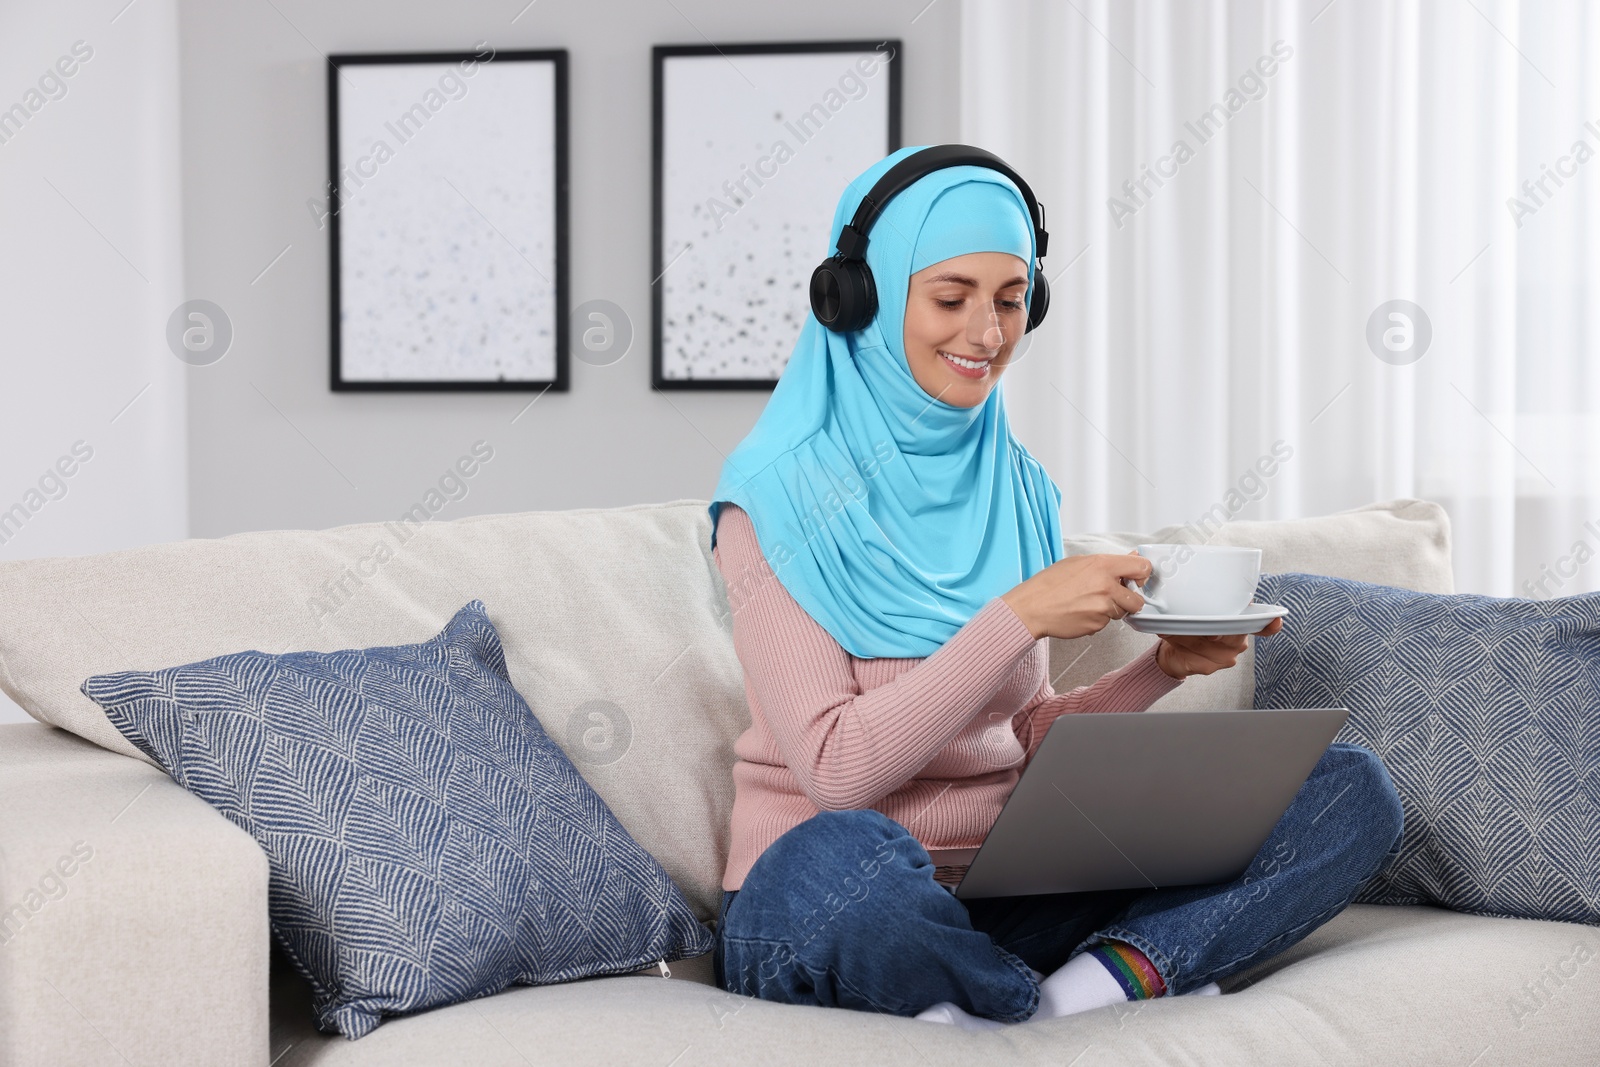 Photo of Muslim woman with cup of drink using laptop at couch in room